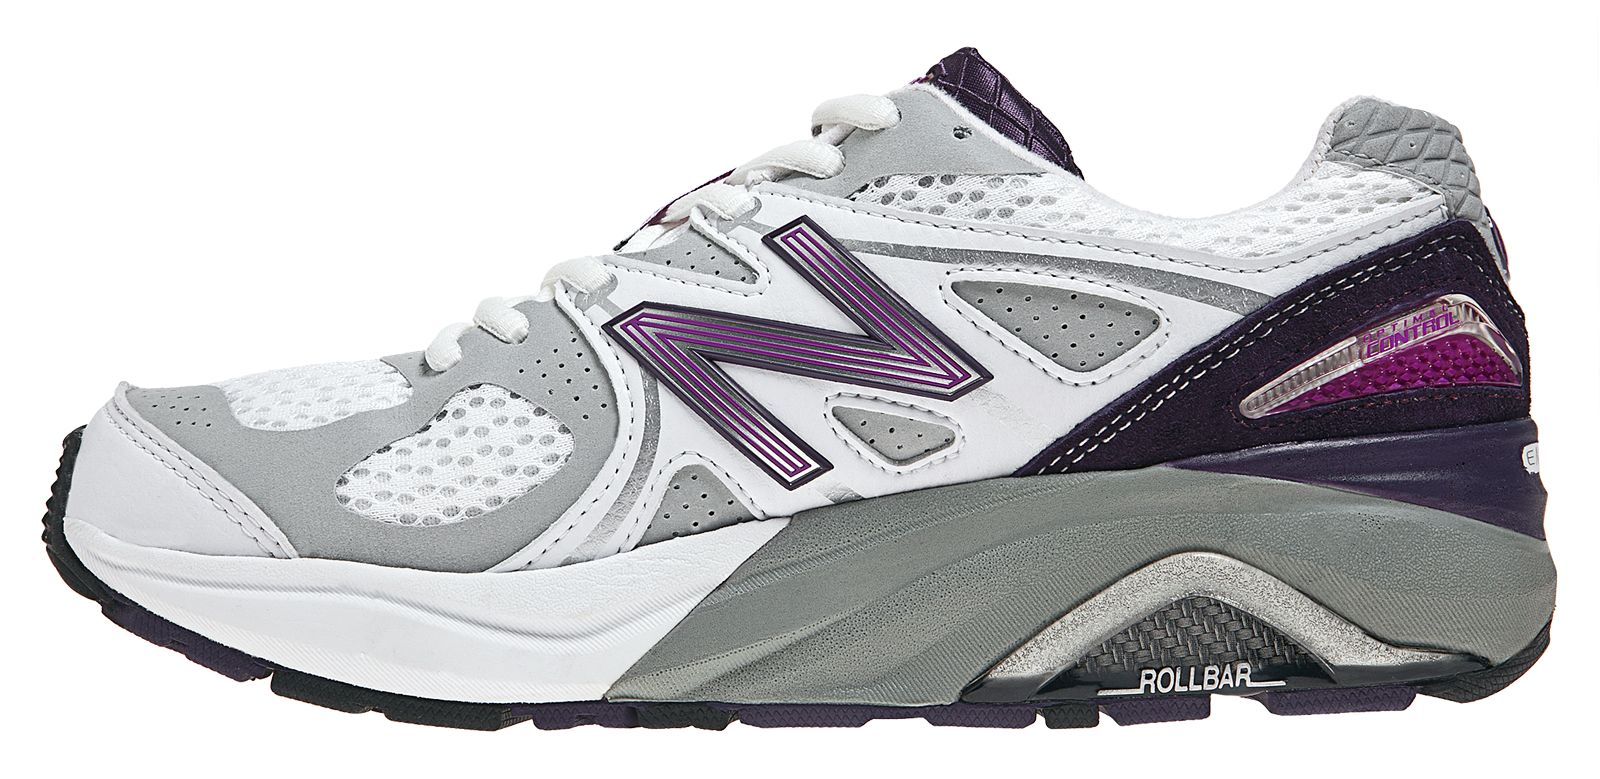 Off on W1540WP1 at Joe's New Balance Outlet